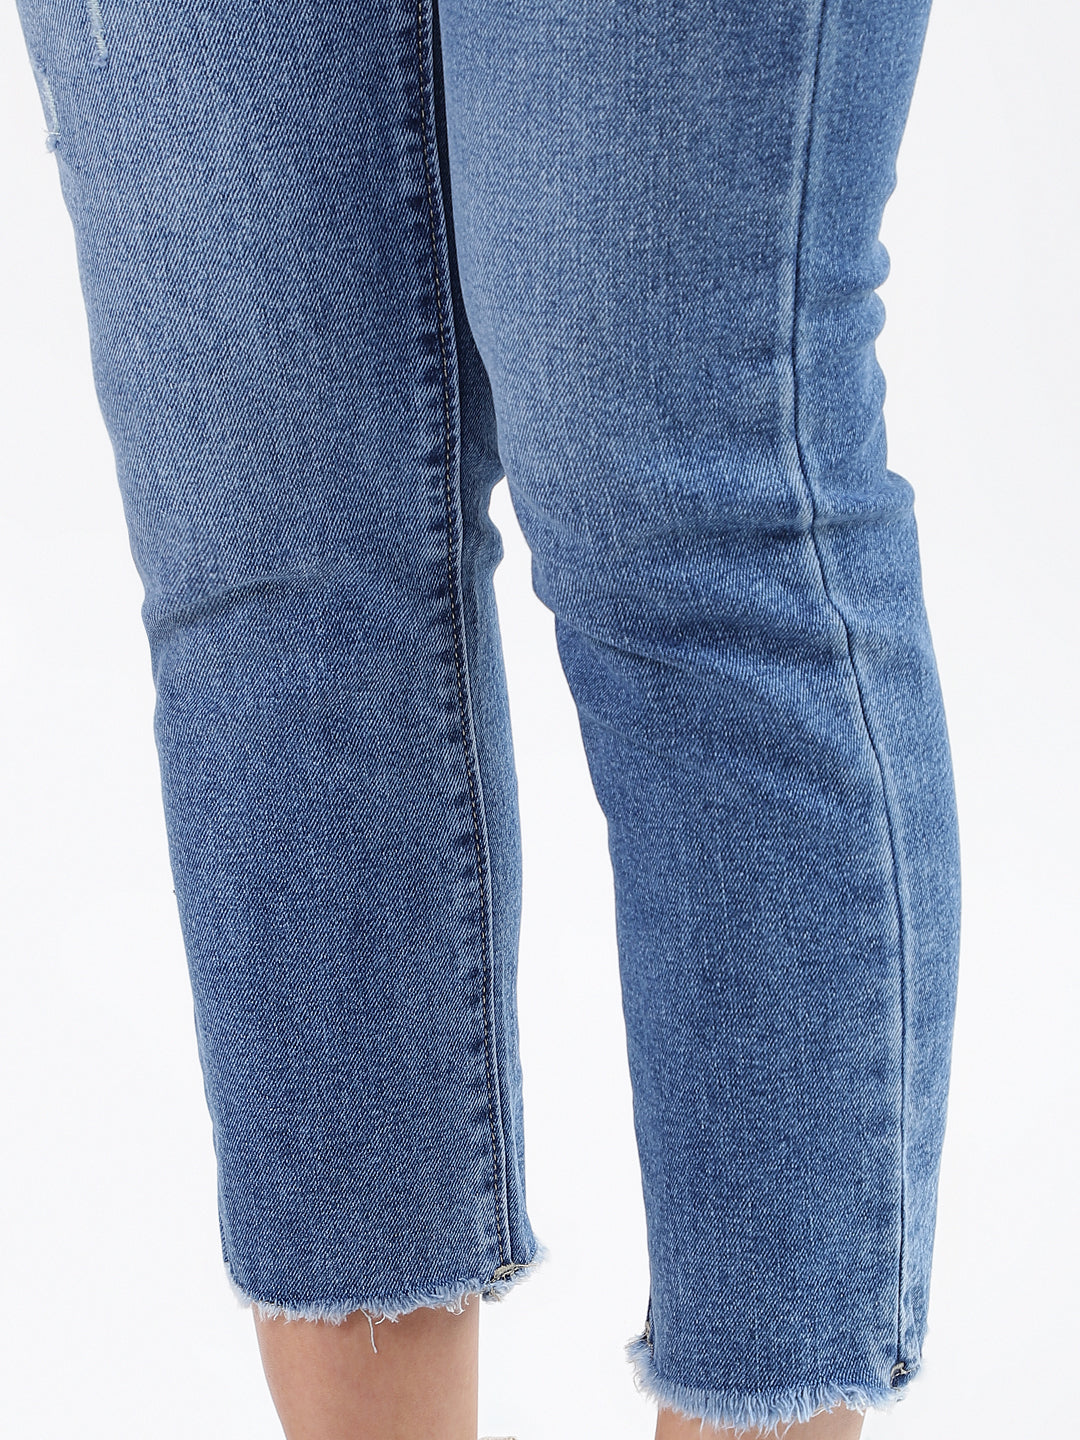 Women's Faded Blue Skinny Jeans - Metal Button Closure